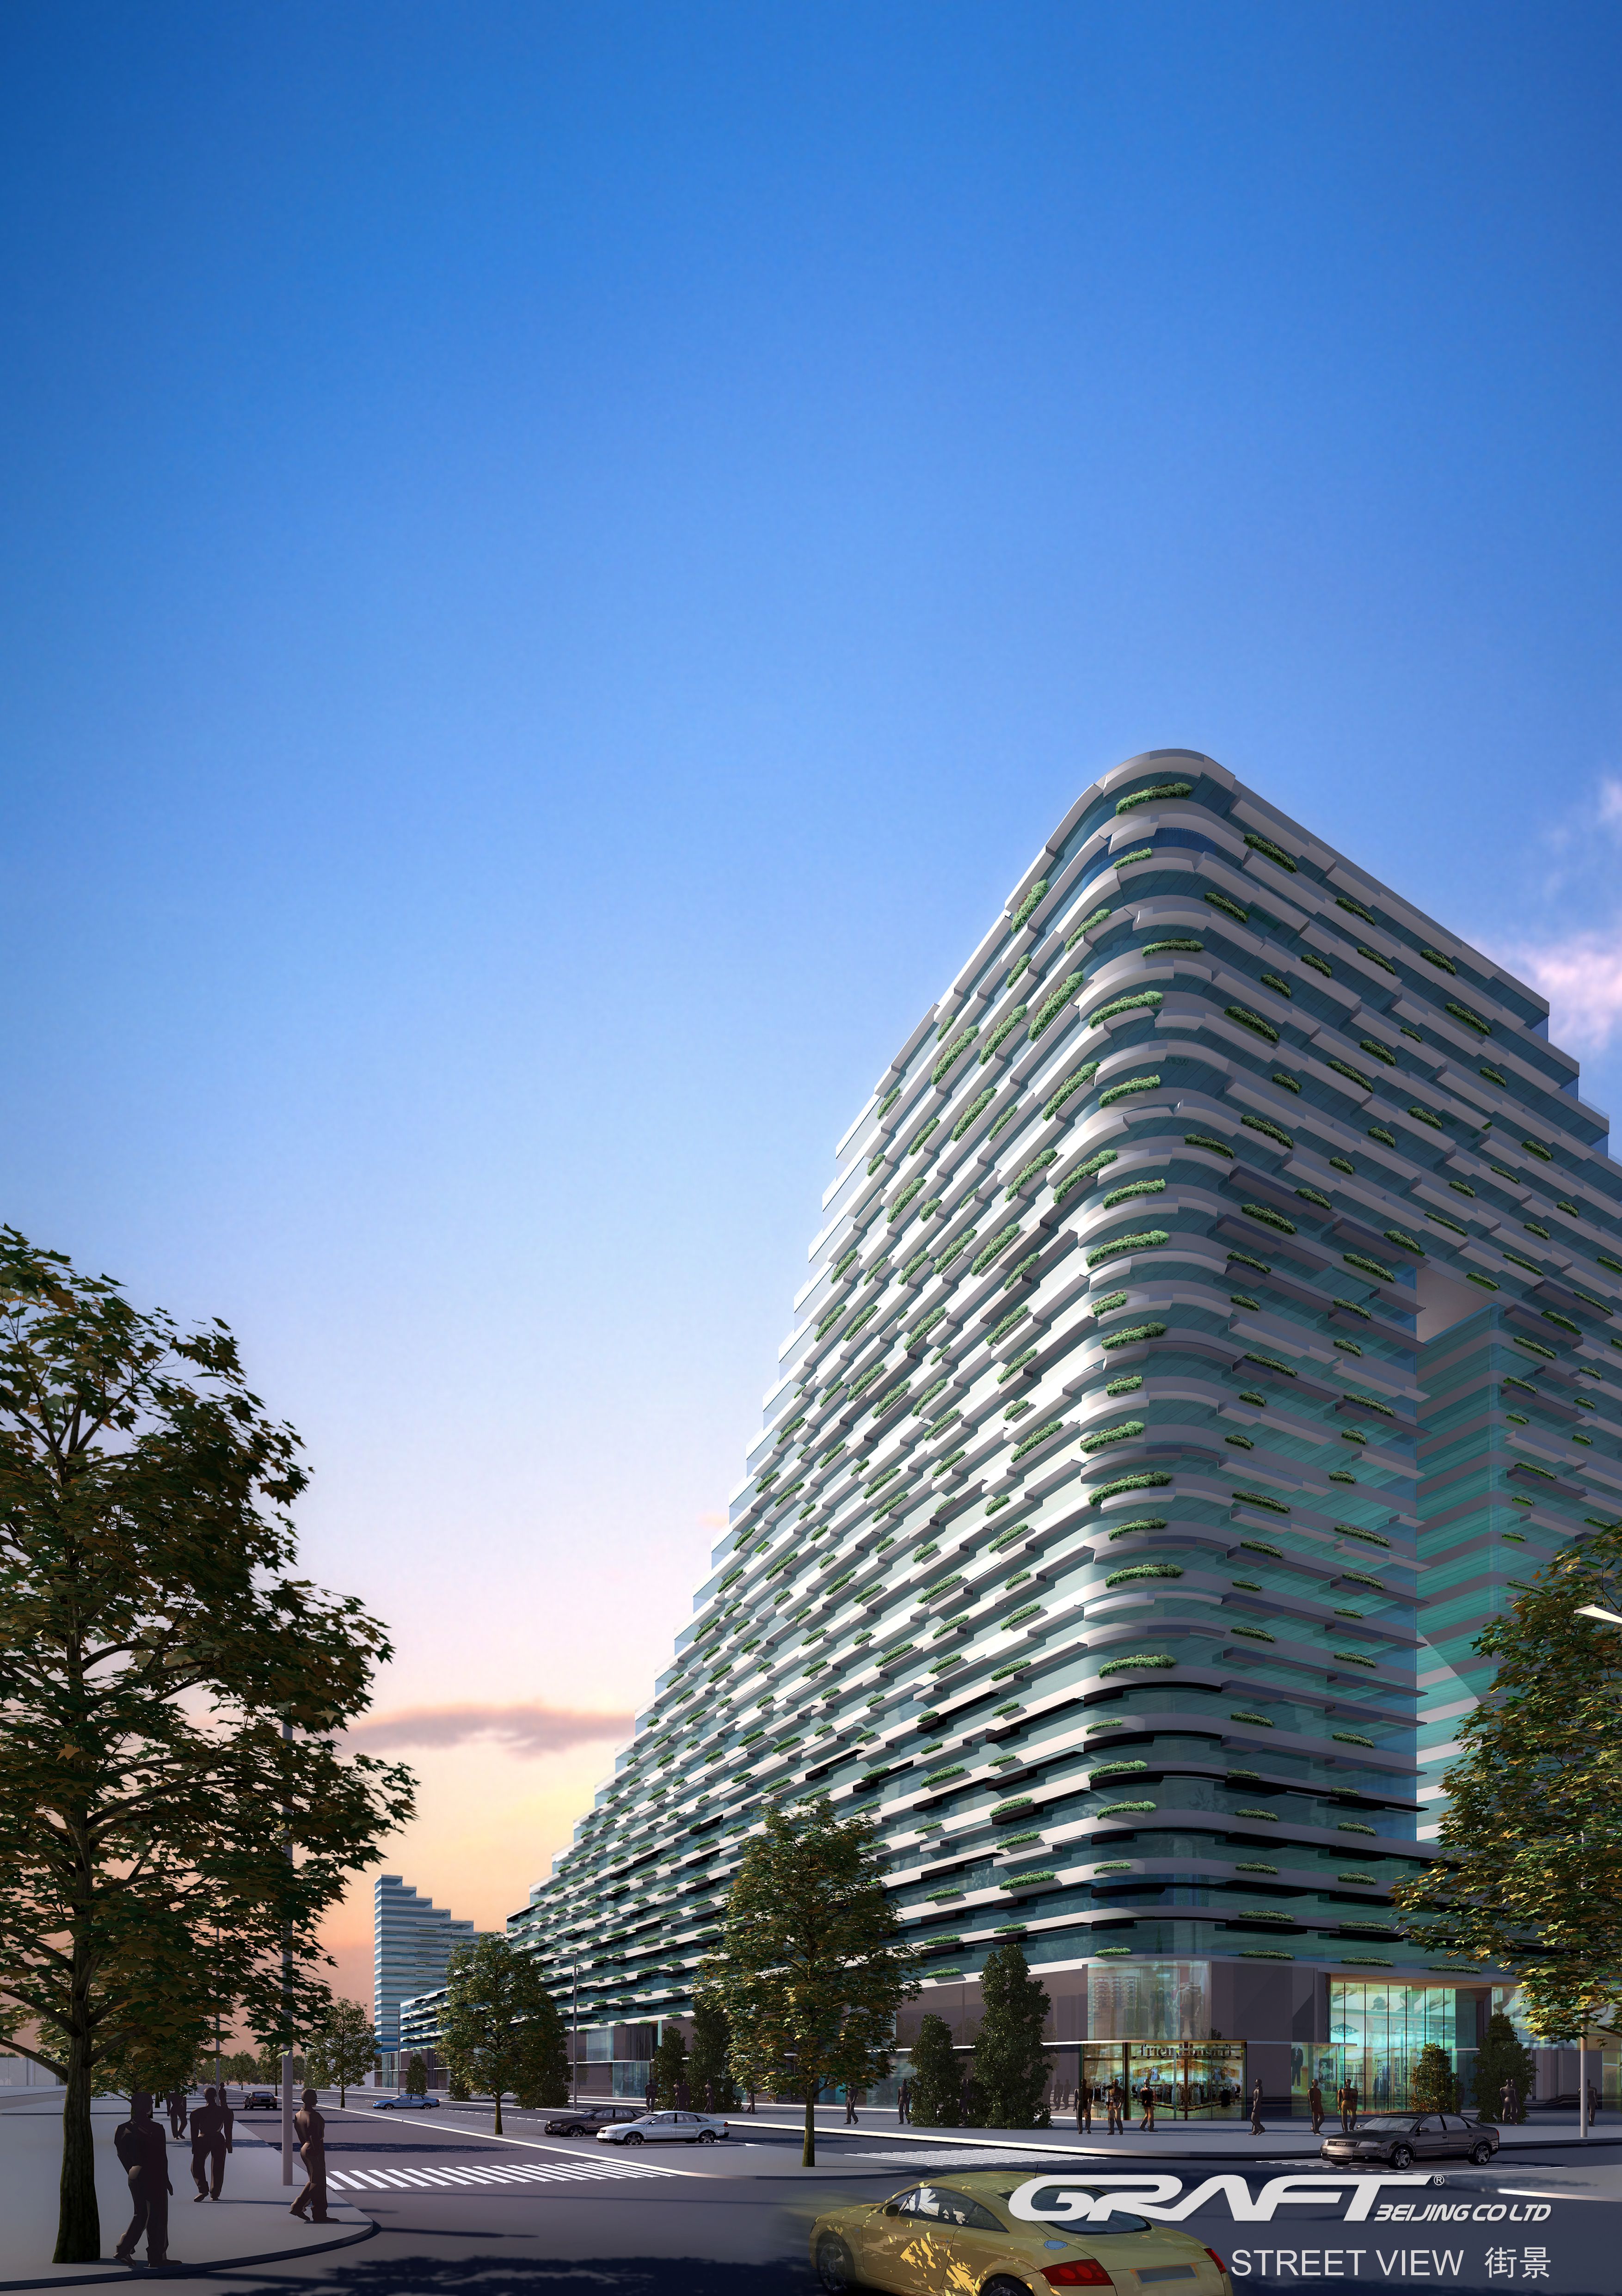 The most prominent aspect of the design is its skyline. Up to 150m long slopes swing up and down along the buildings, creating the visual effect of mountain ranges. The project provides excellent living conditions for up to 2,000 families and adding much needed retail and entertainment facilities for the wider area.